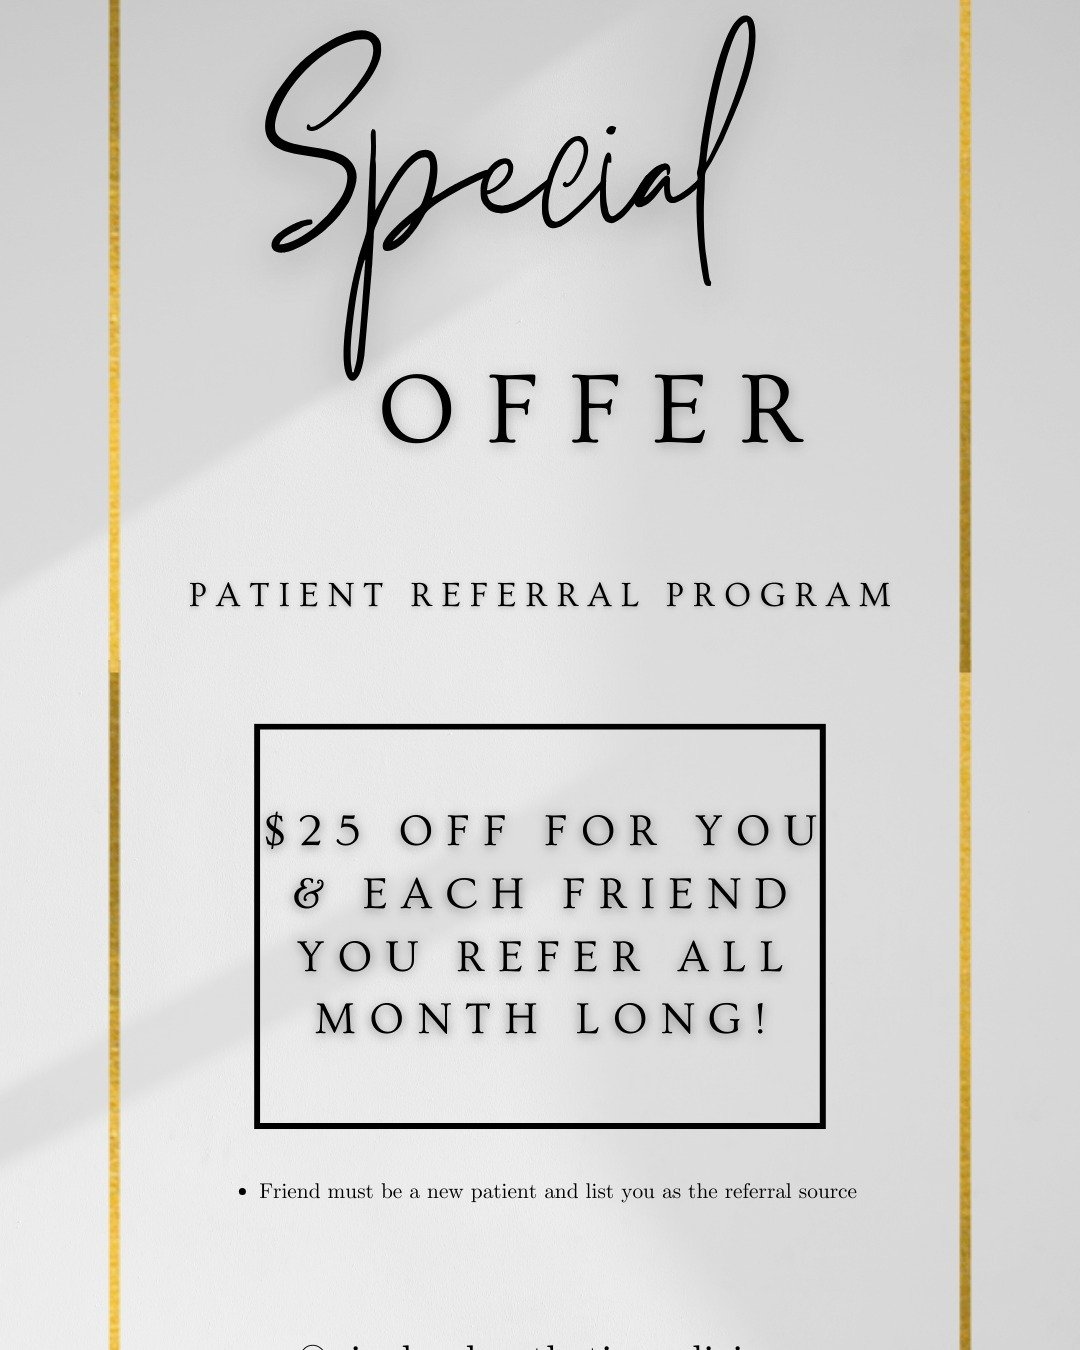 Did you know&hellip;.
Pineland Aesthetic Medicine offers a referral program?

Current patients can refer friends and receive a $25 discount on the following months order when your referral starts a program AND that person will receive a $25 discount 